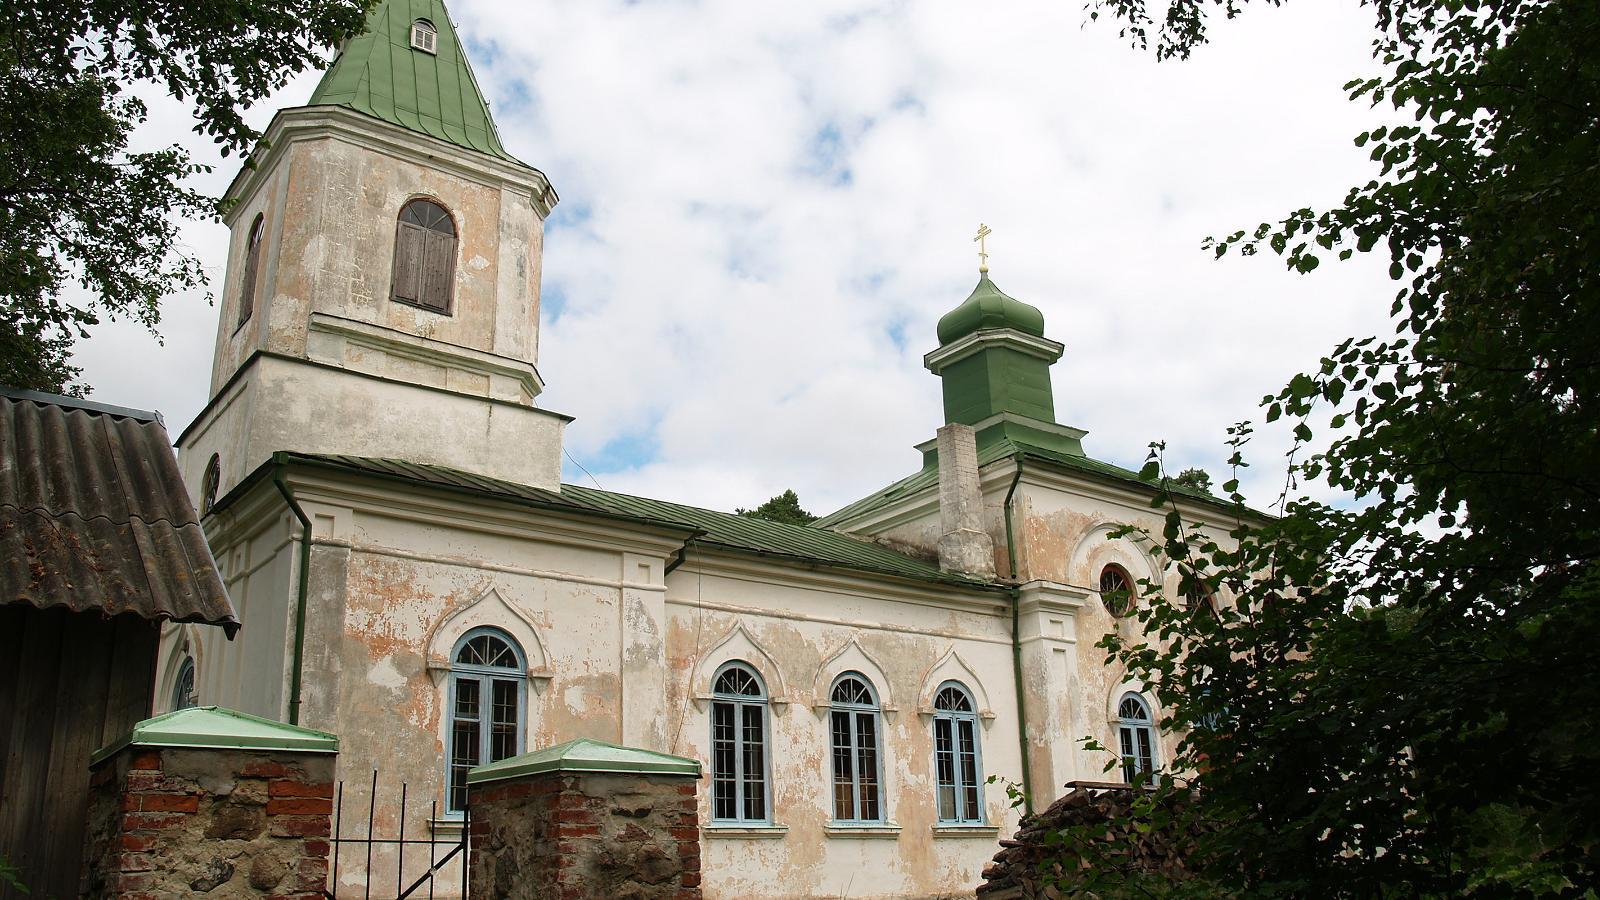 Apostolic Orthodox Church of the Transfiguration of Our Lord at Häädemeeste